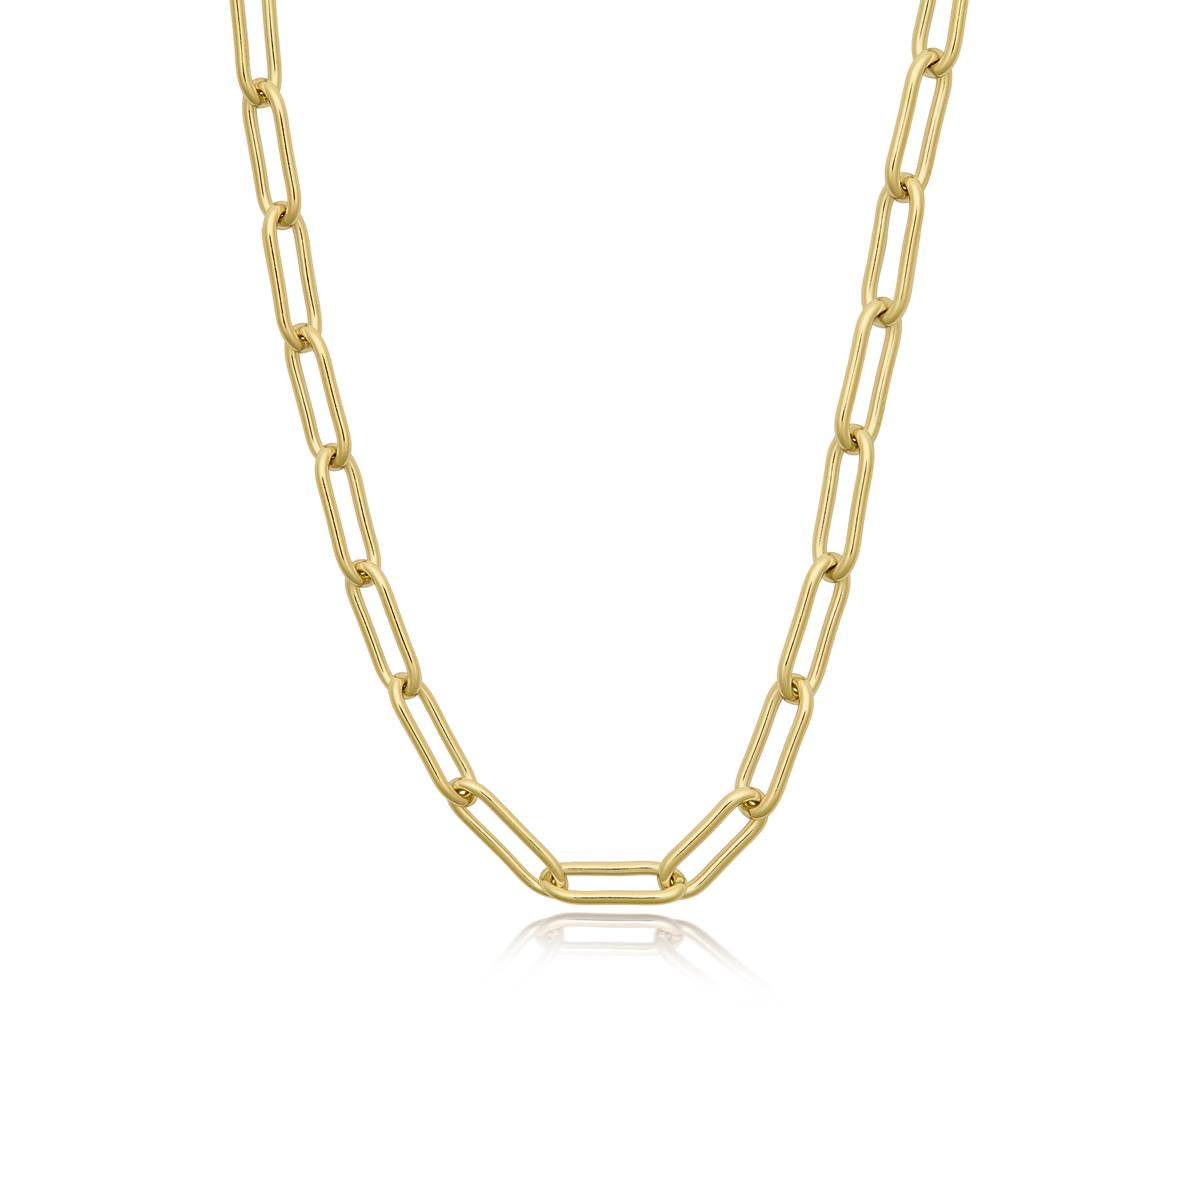 Achara 18 Inch Paperclip Chain Link Necklace - Gold